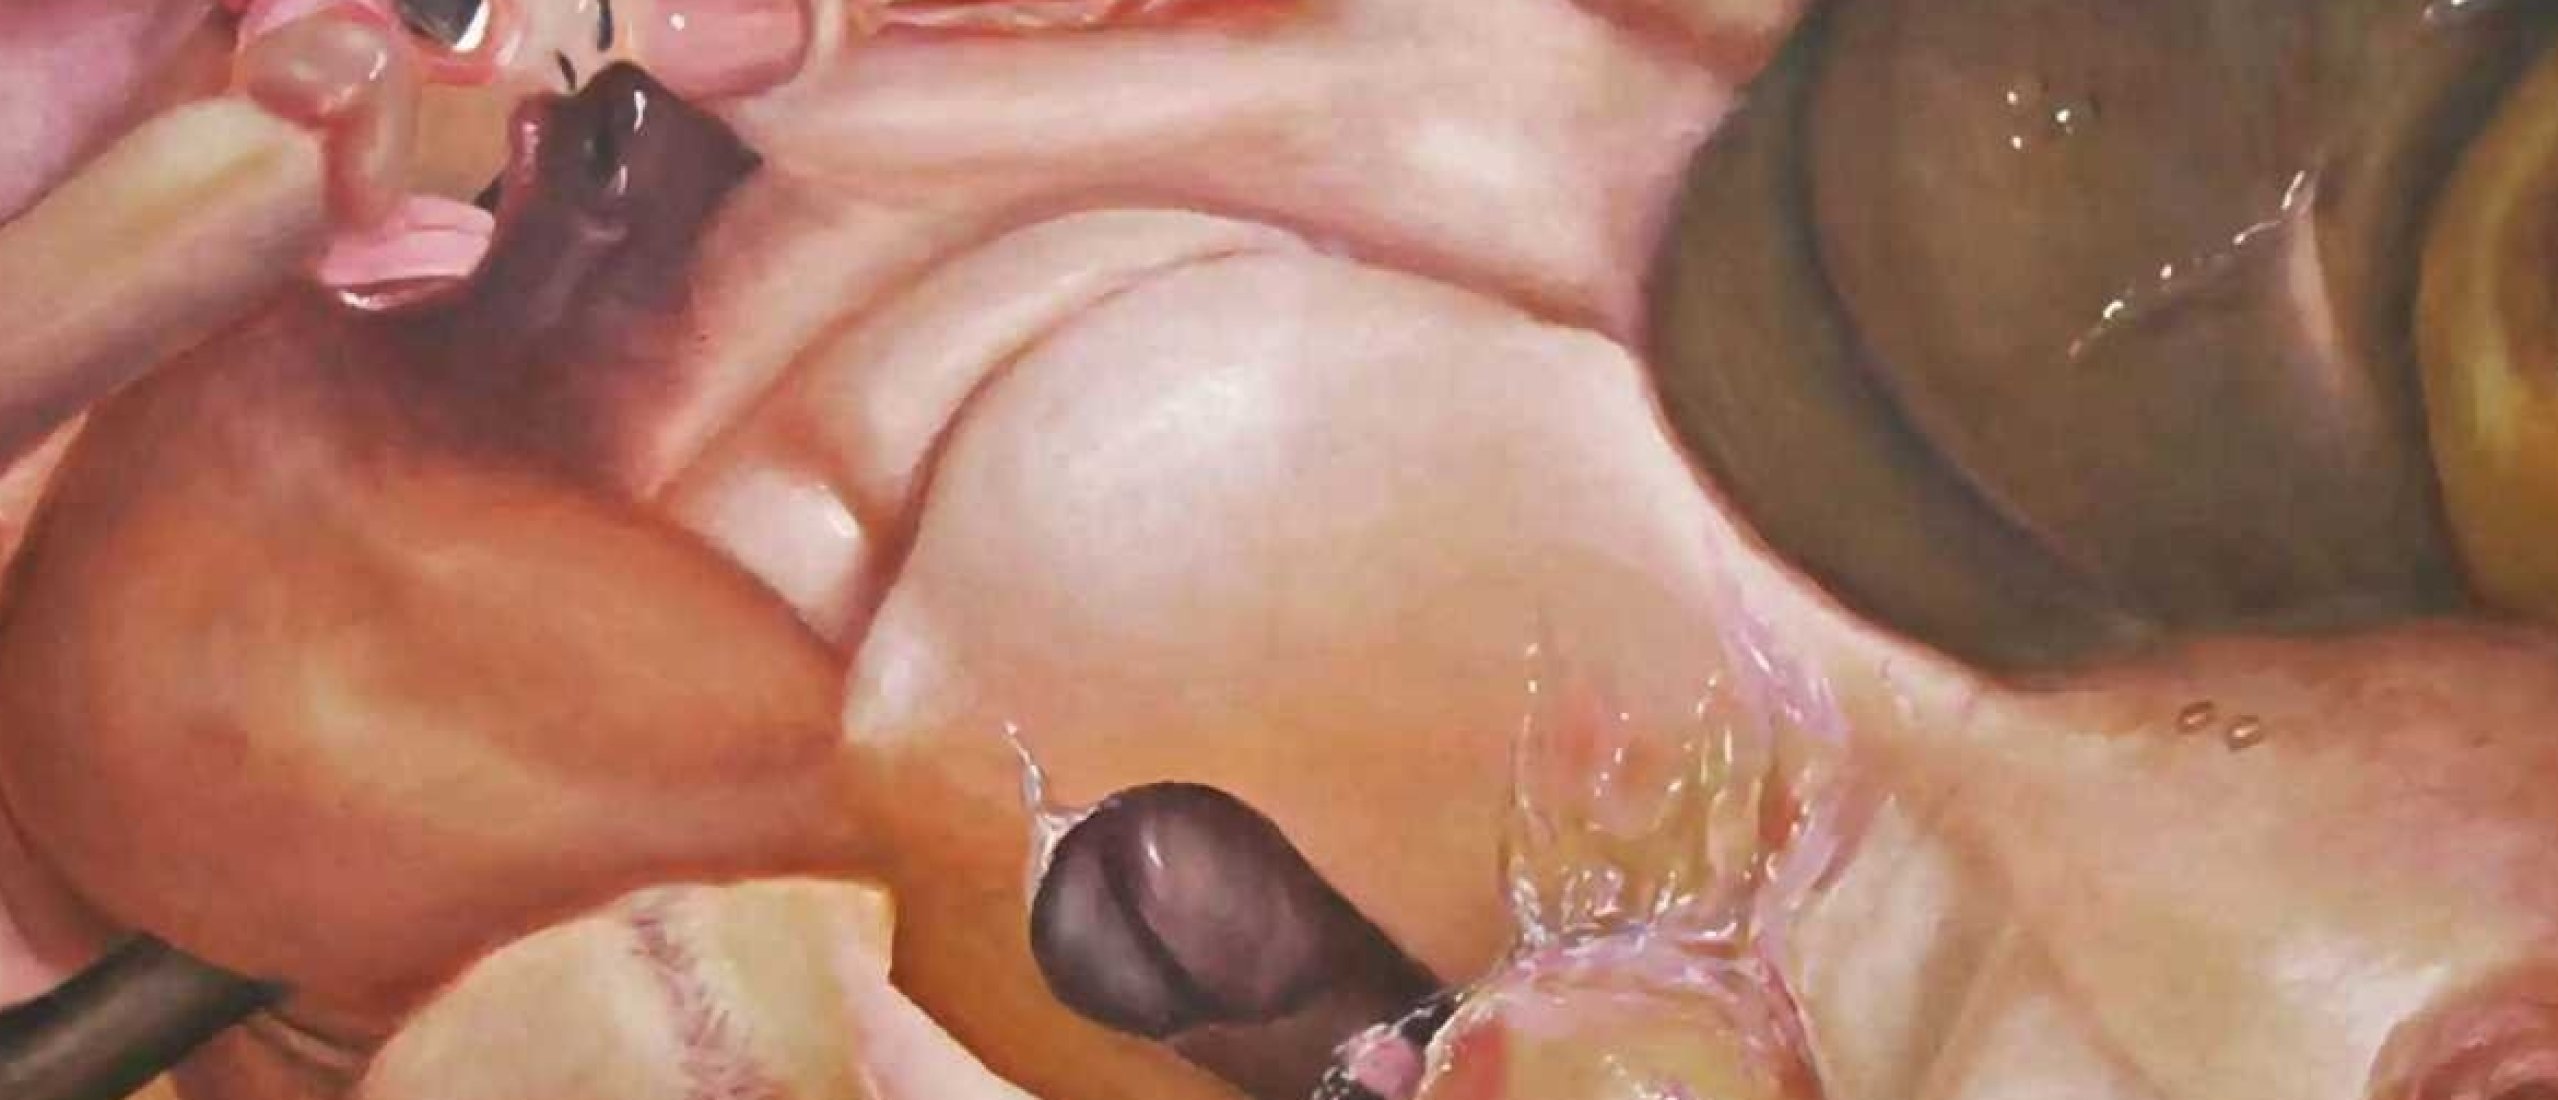 Curtains of the Labia, The Art of Ruth Bircham